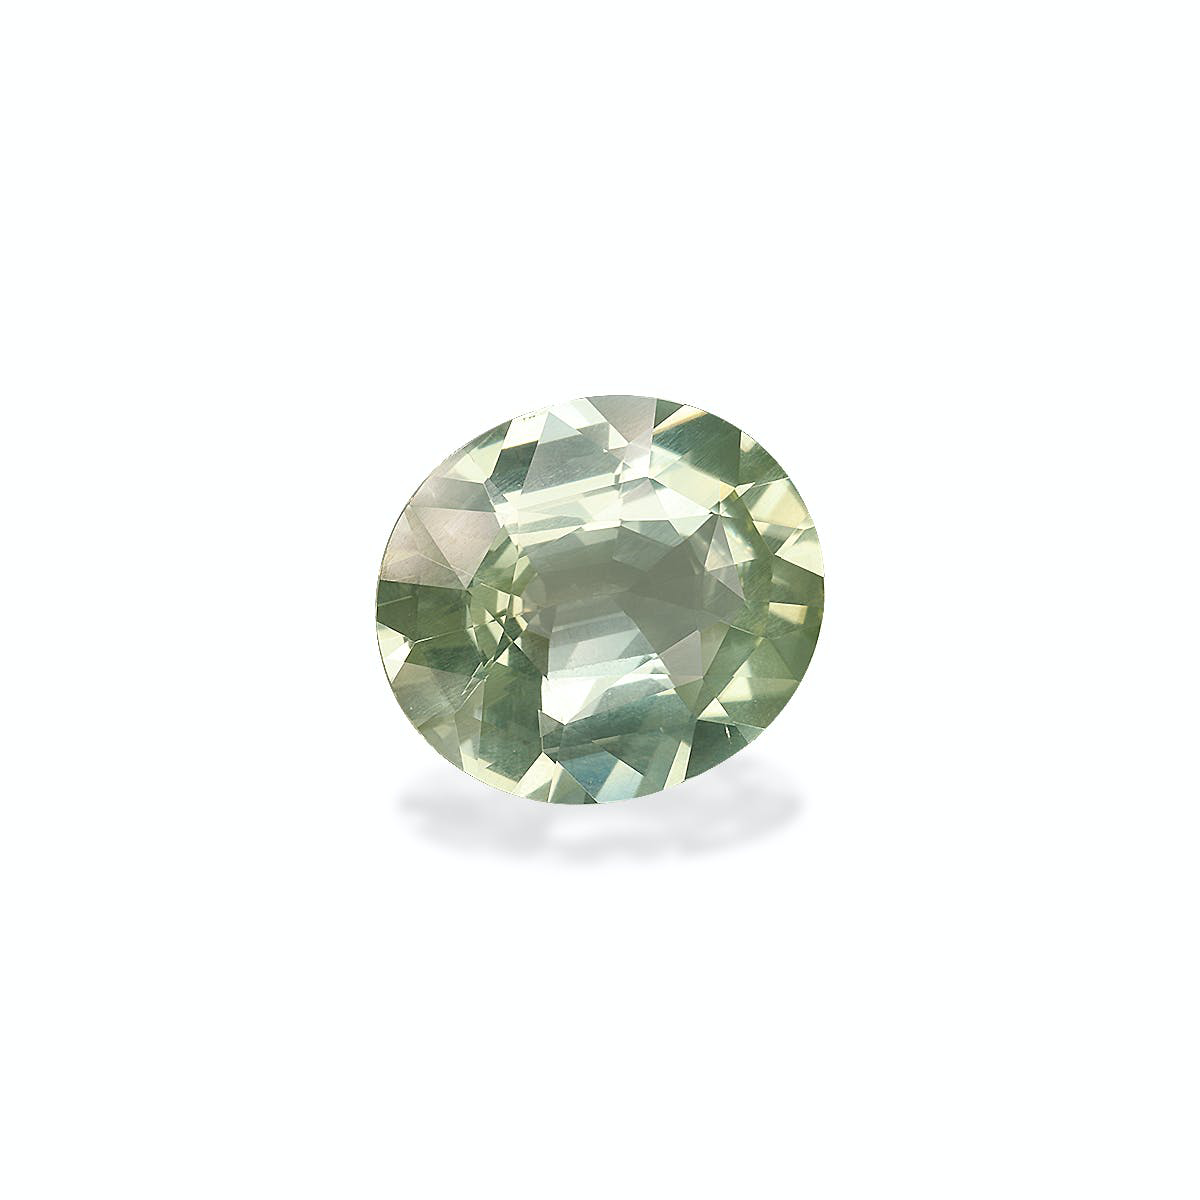 Picture of Pale Green Tourmaline 9.85ct - 16x14mm (TG0622)